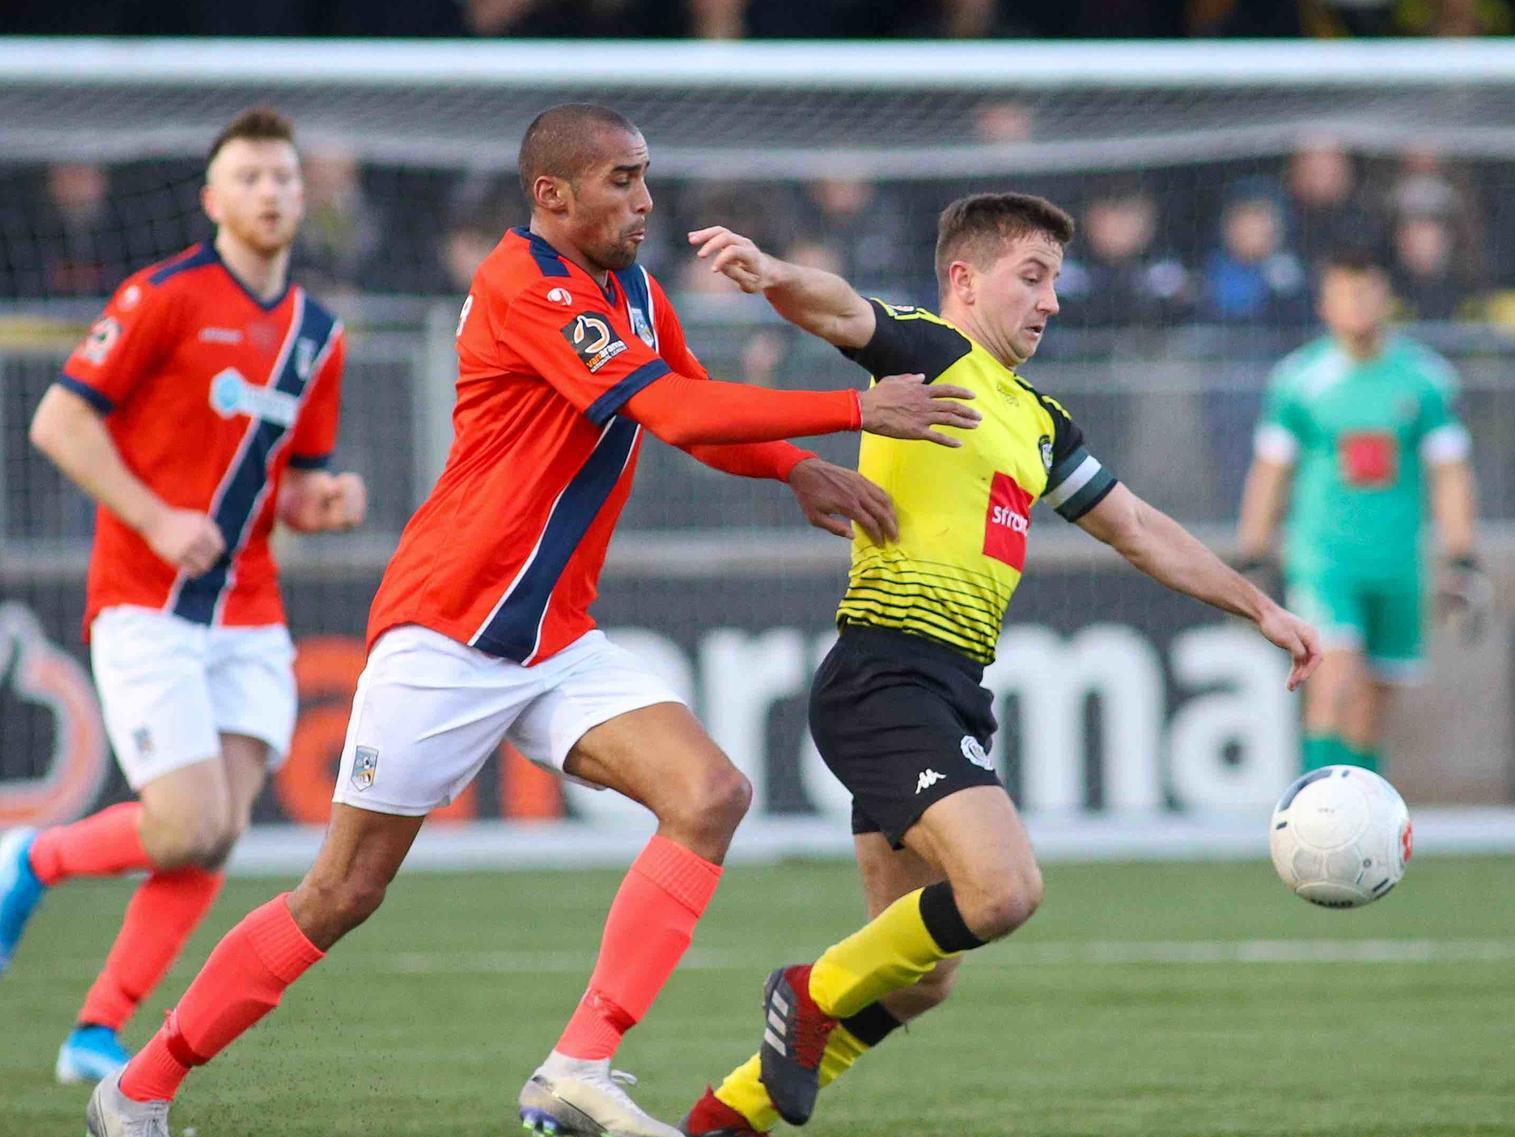 Josh Falkingham in action during Harrogate Town's scrappy win over Maidenhead United.